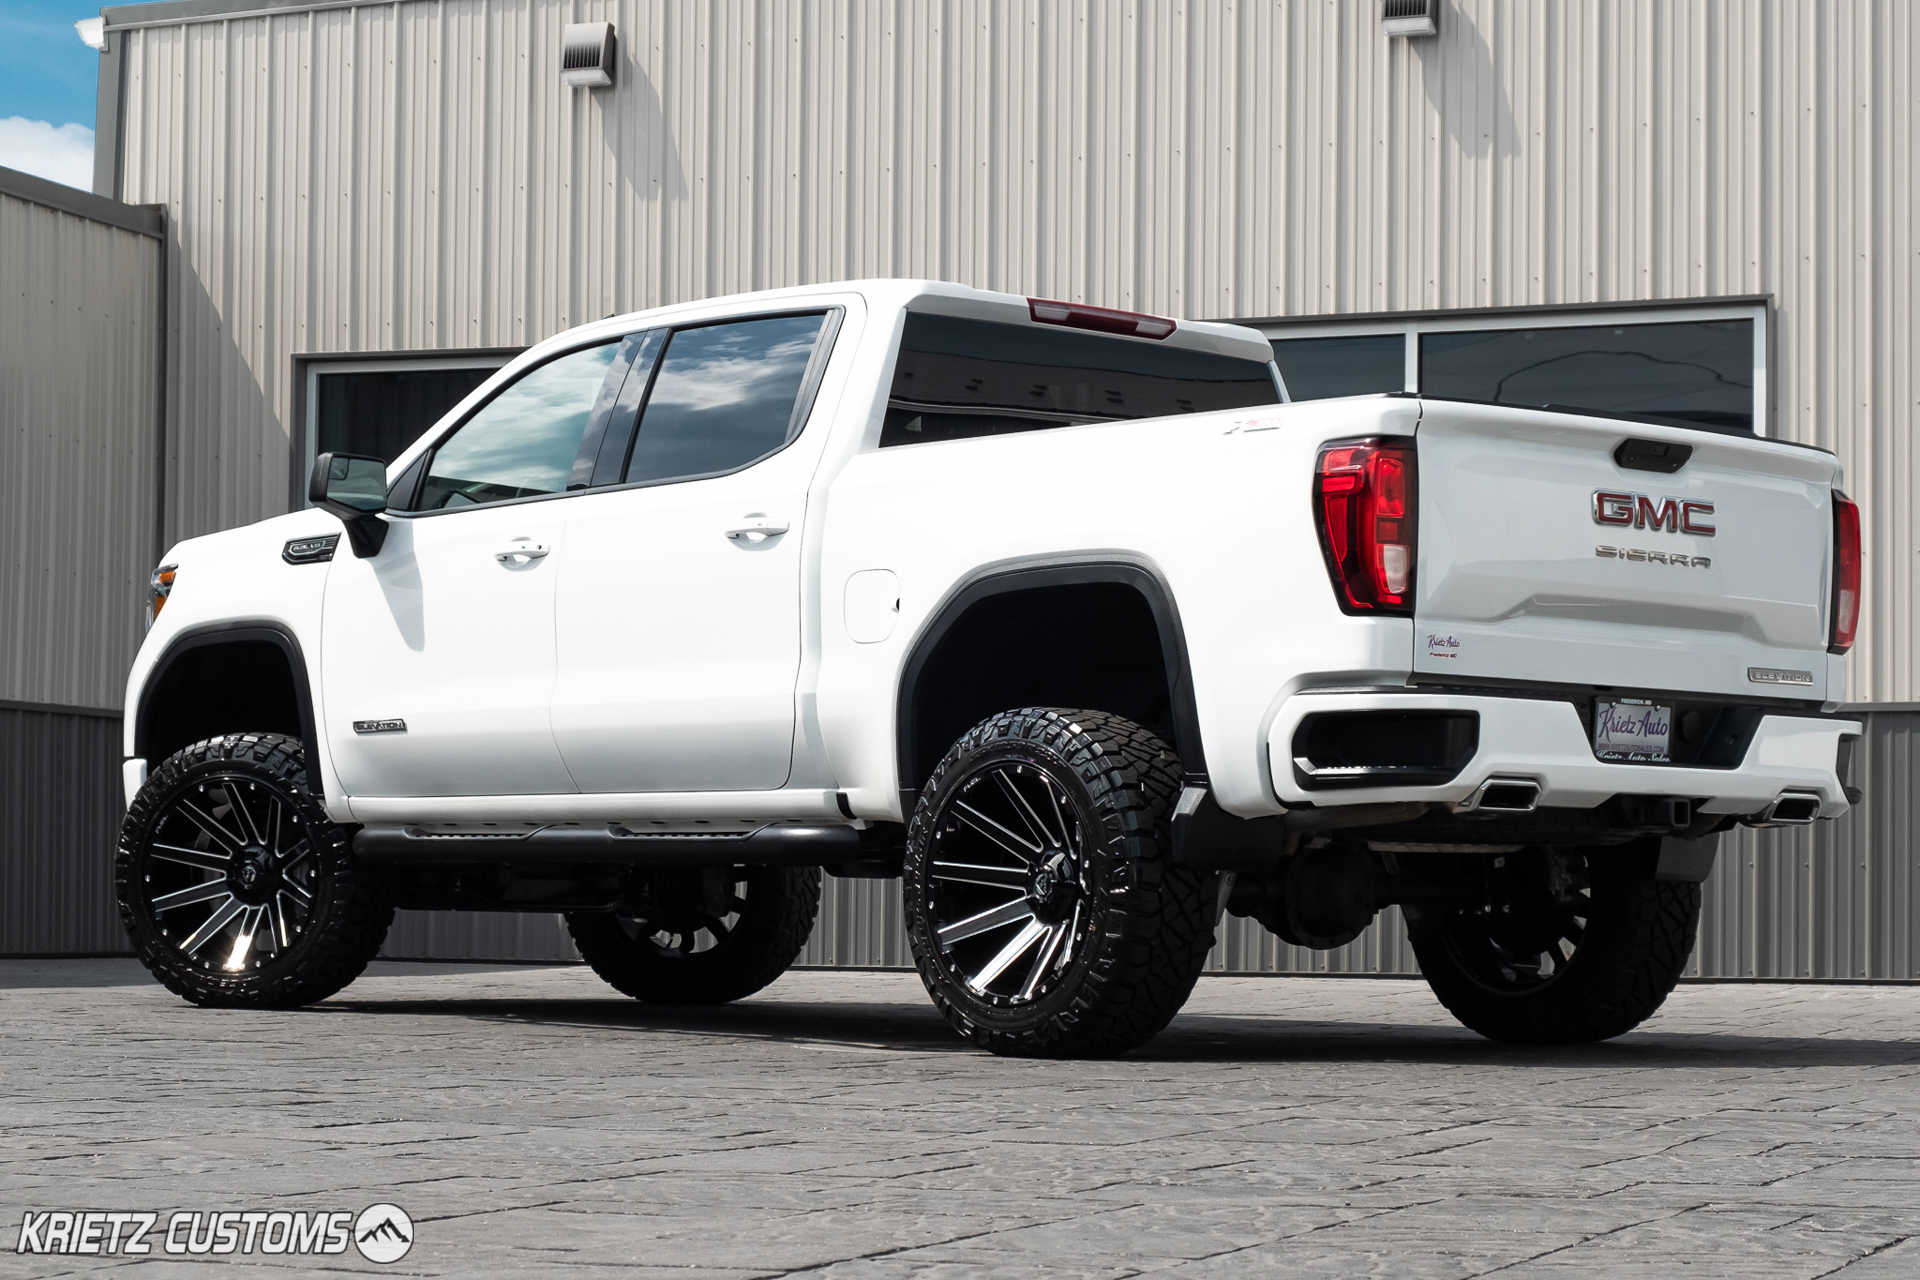 Lifted 2019 GMC Sierra 1500 with 22×12 Fuel Contra Wheels and 7 Inch Gmc 6.2 Vs 5.3 Fuel Economy